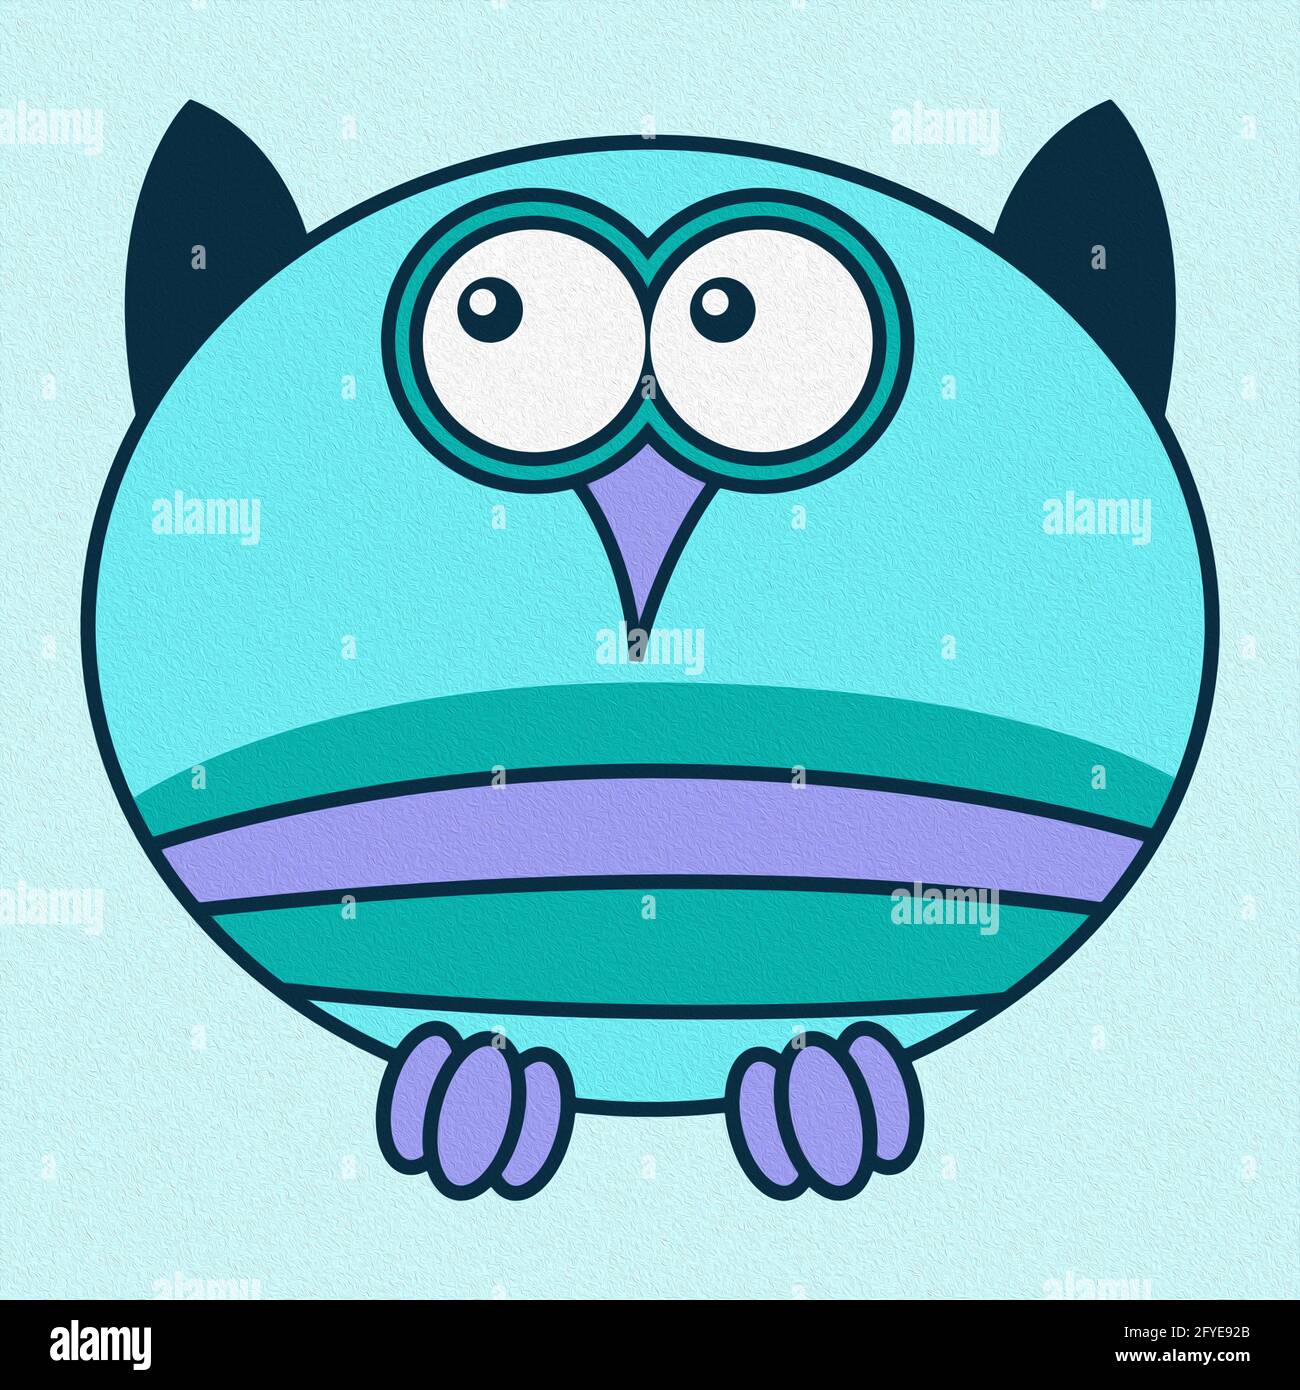 Illustration of amusing cartoon owl in oval shape on pale blue background, made as an oil painting Stock Photo